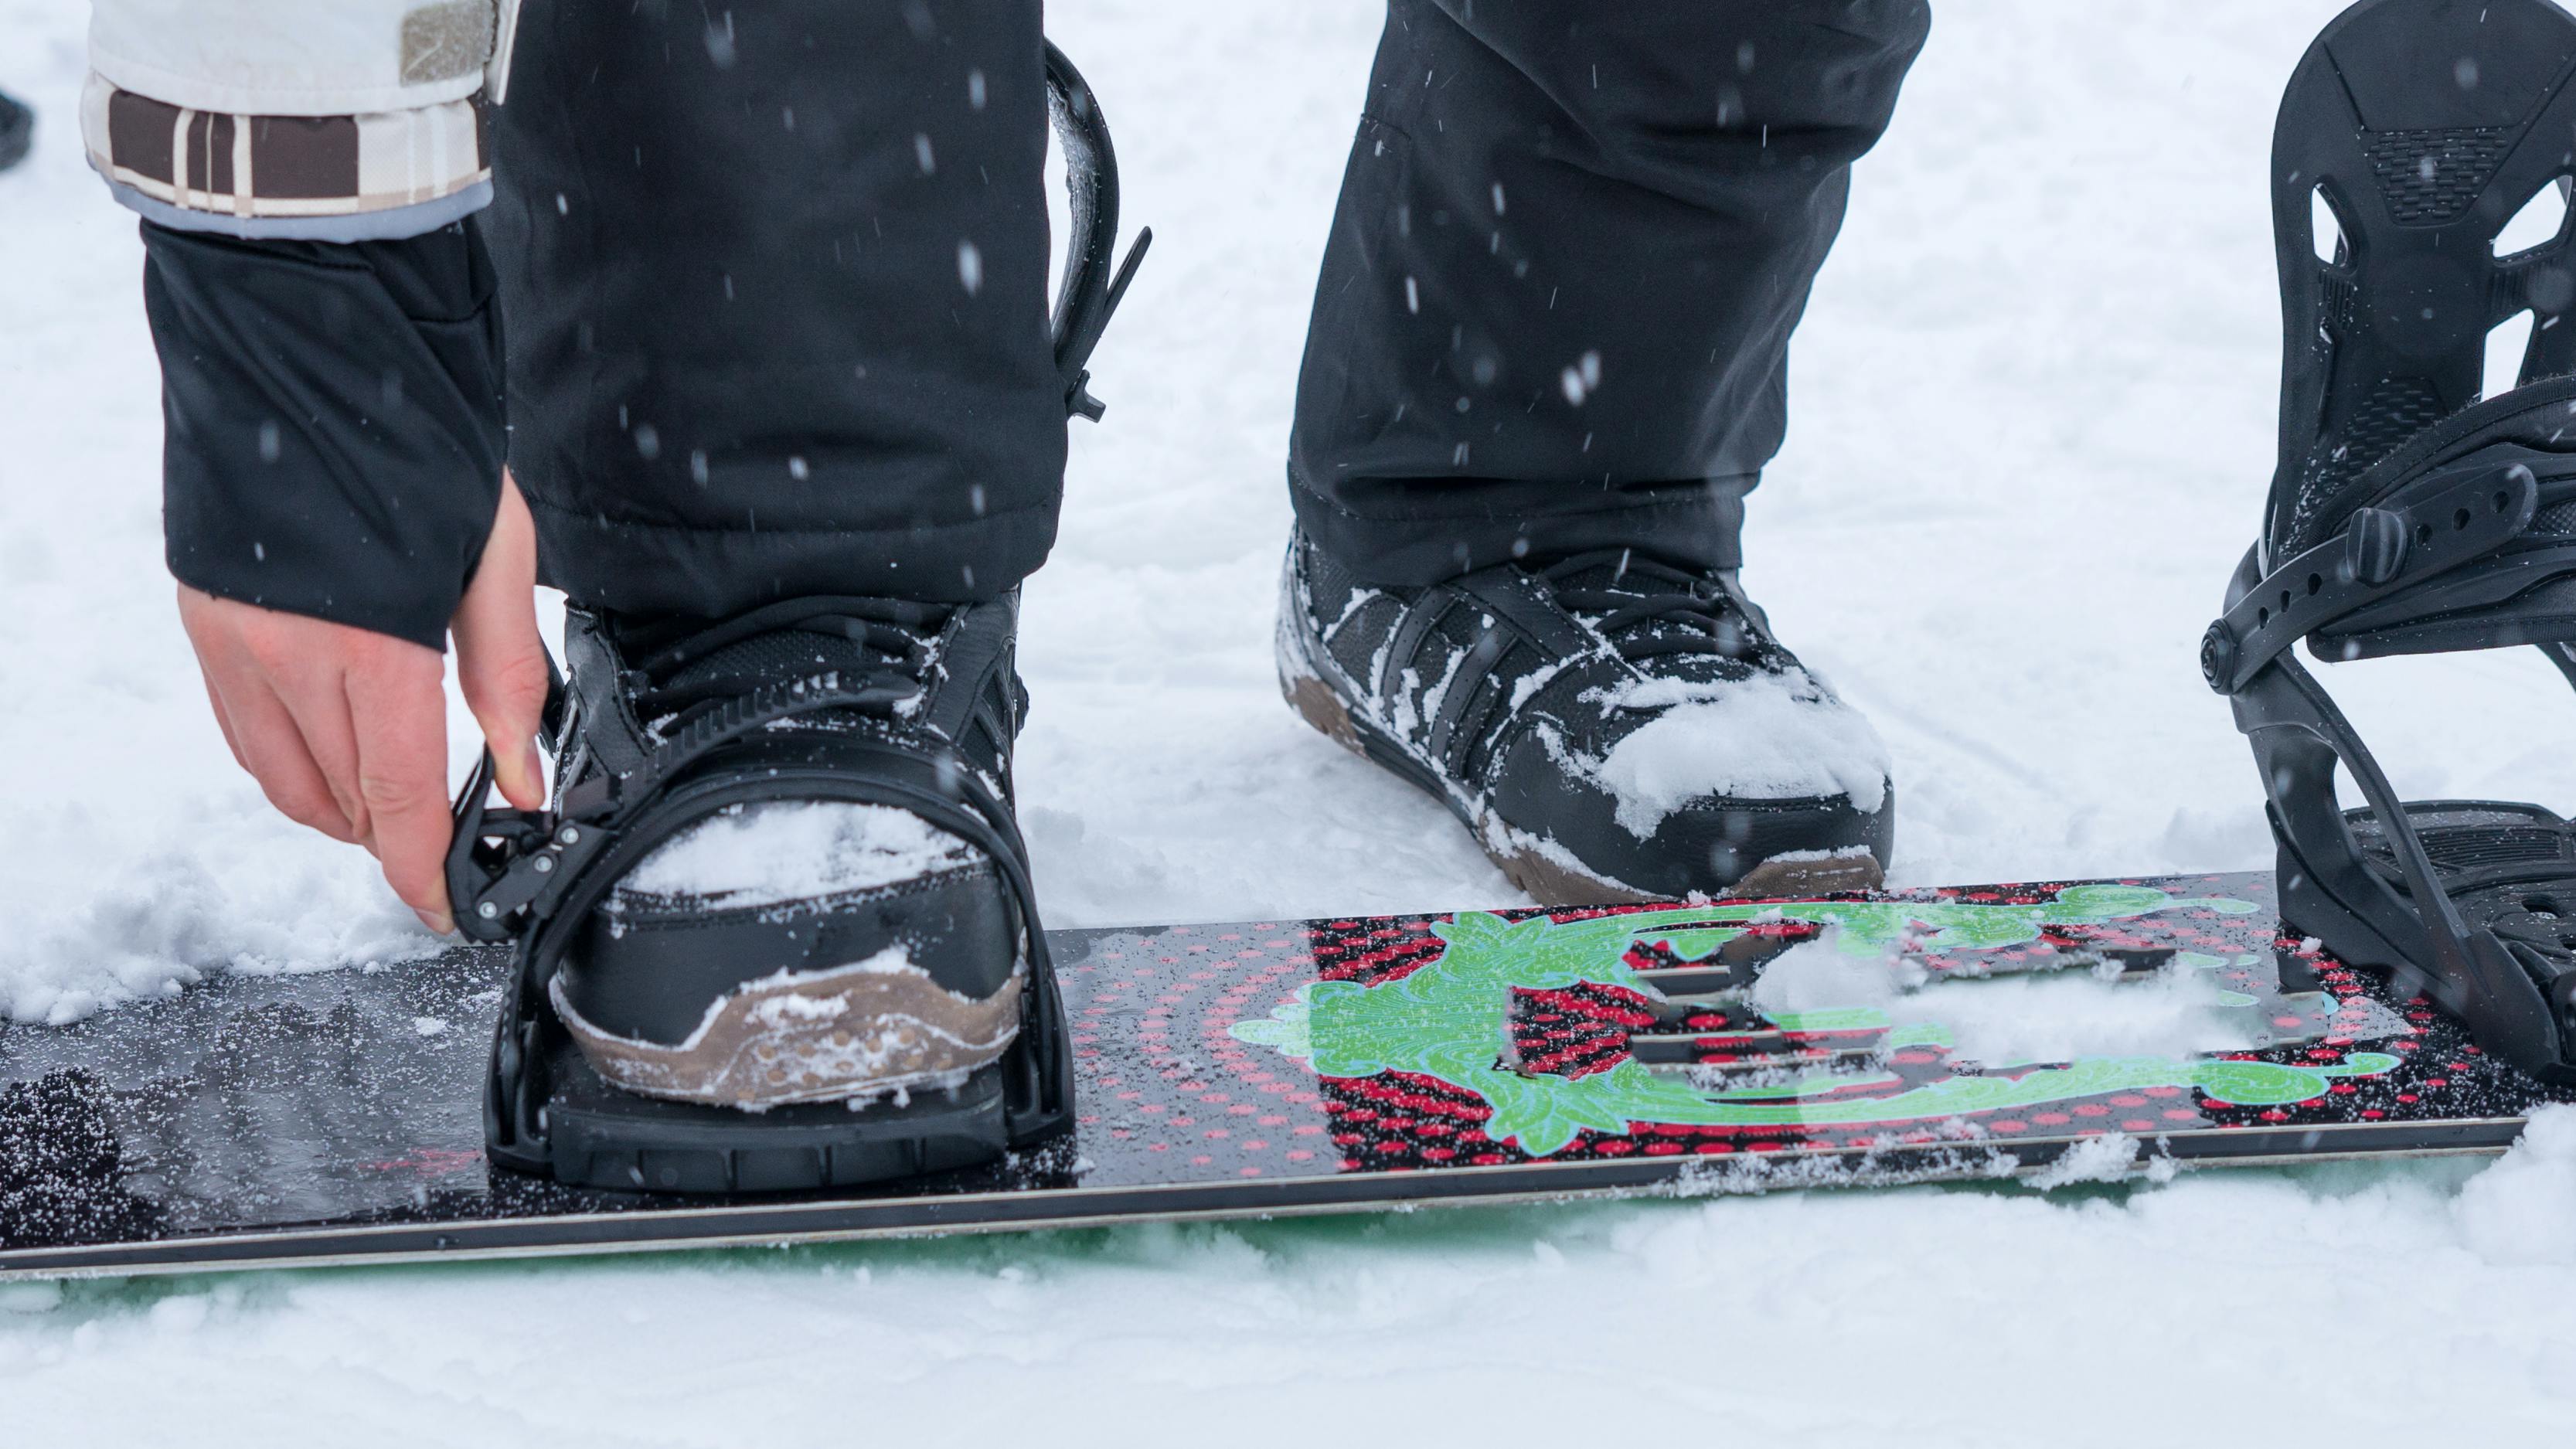 A snowboarder attaching his boots into his snowboard bindings.